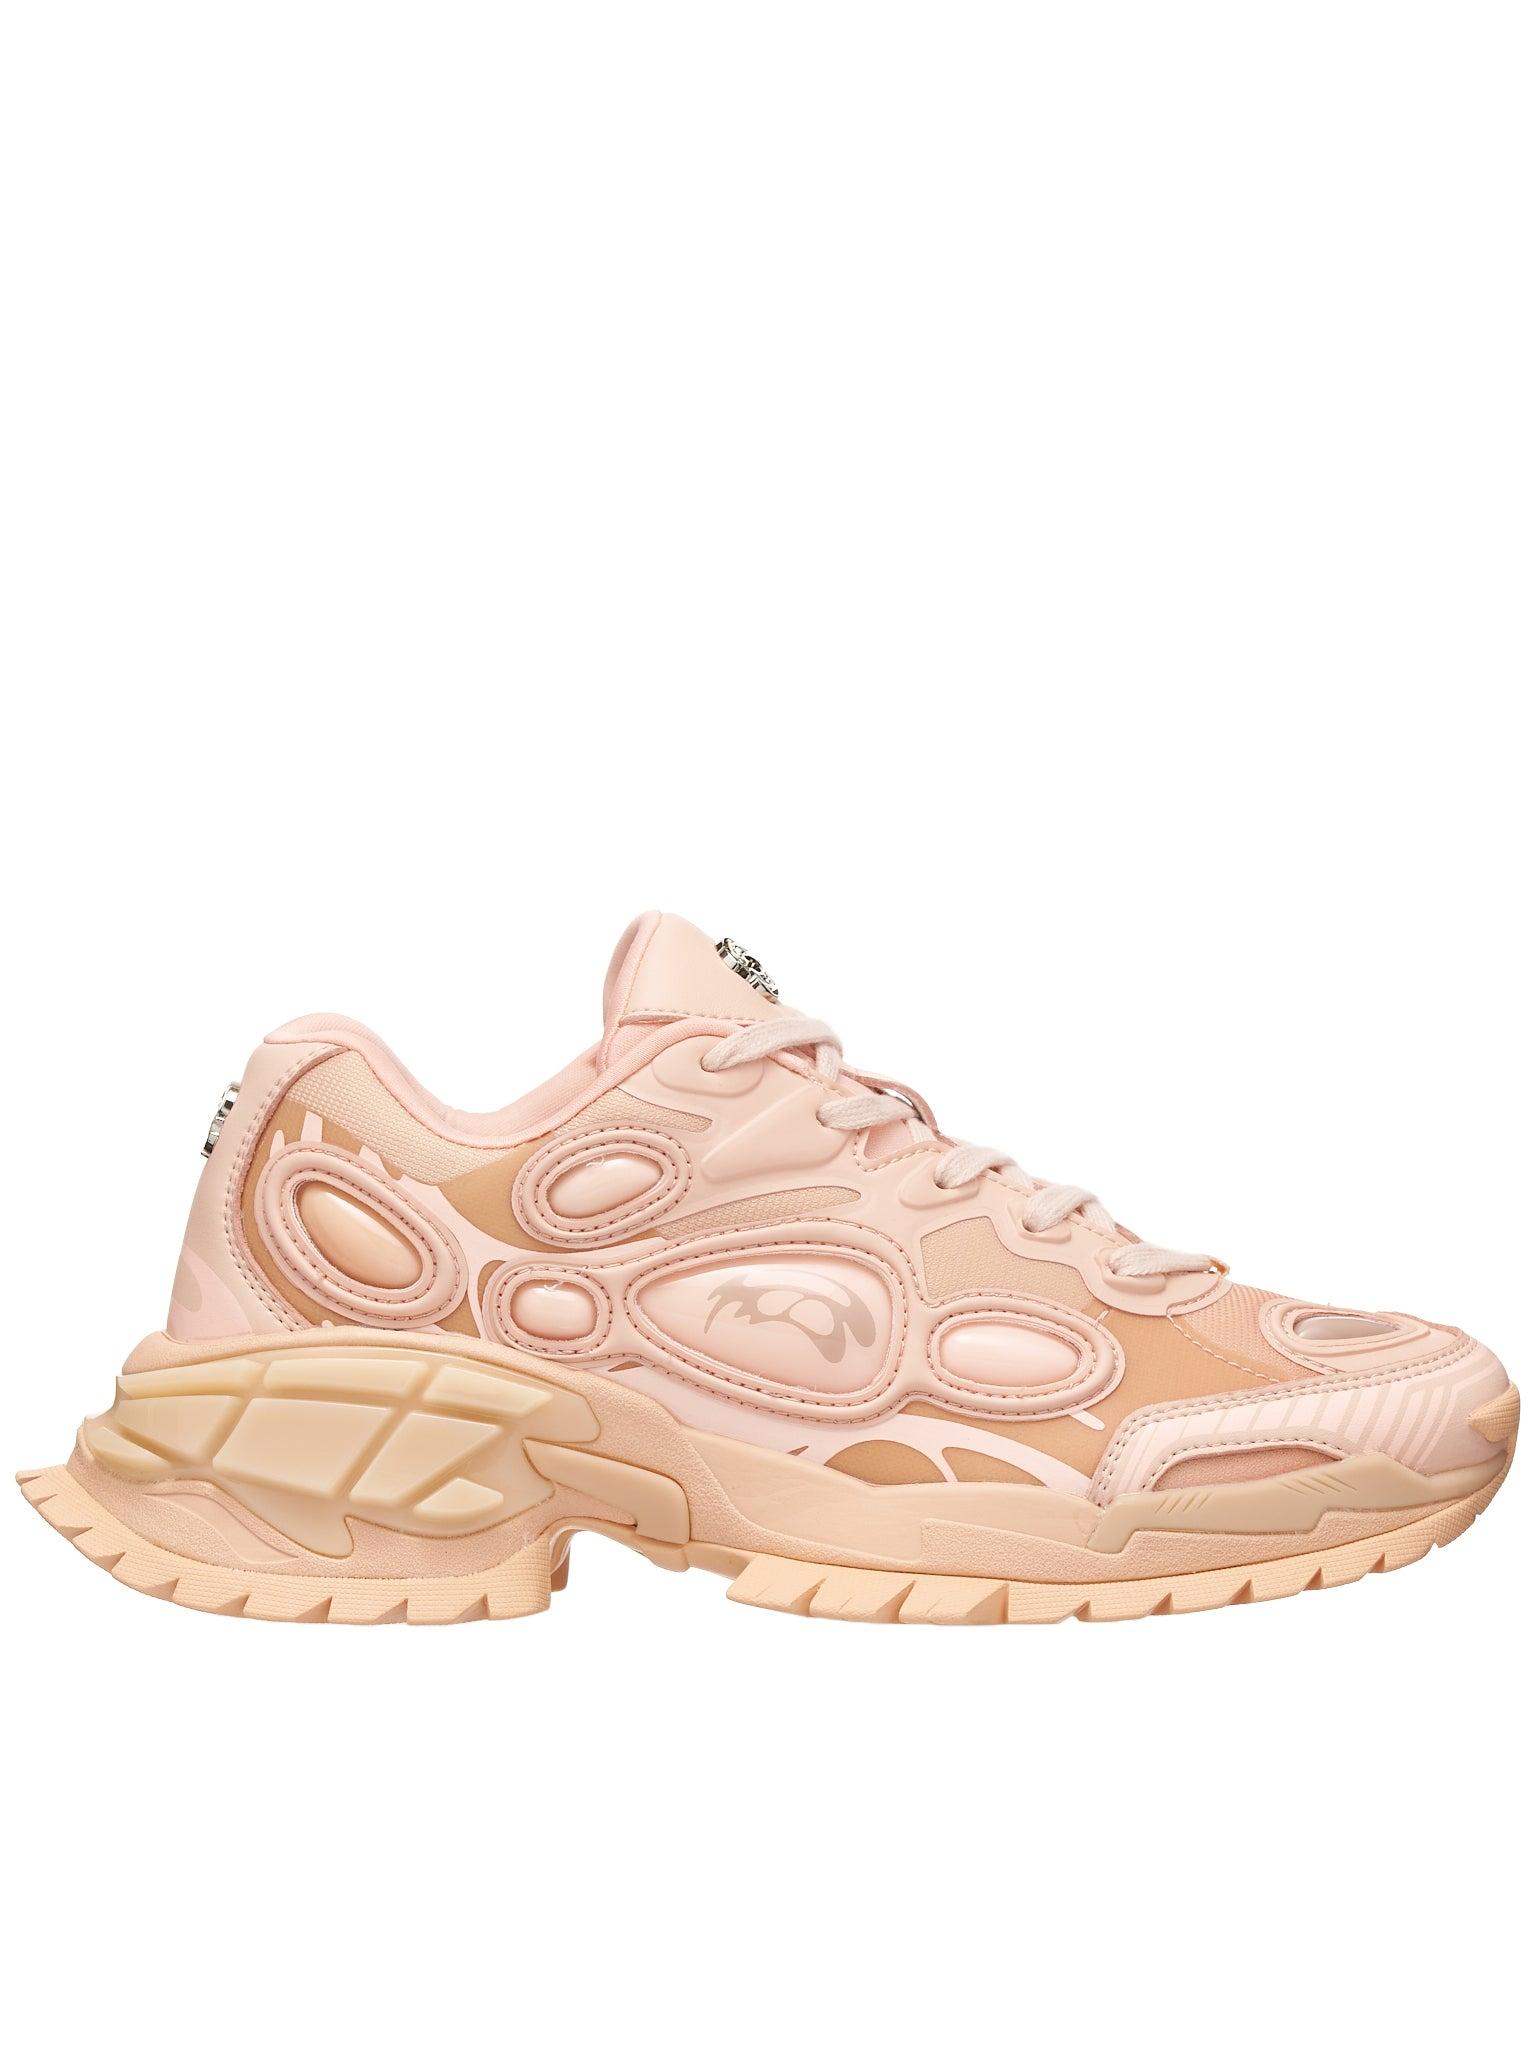 Rombaut Nucleo Sneakers in Pink | Lyst